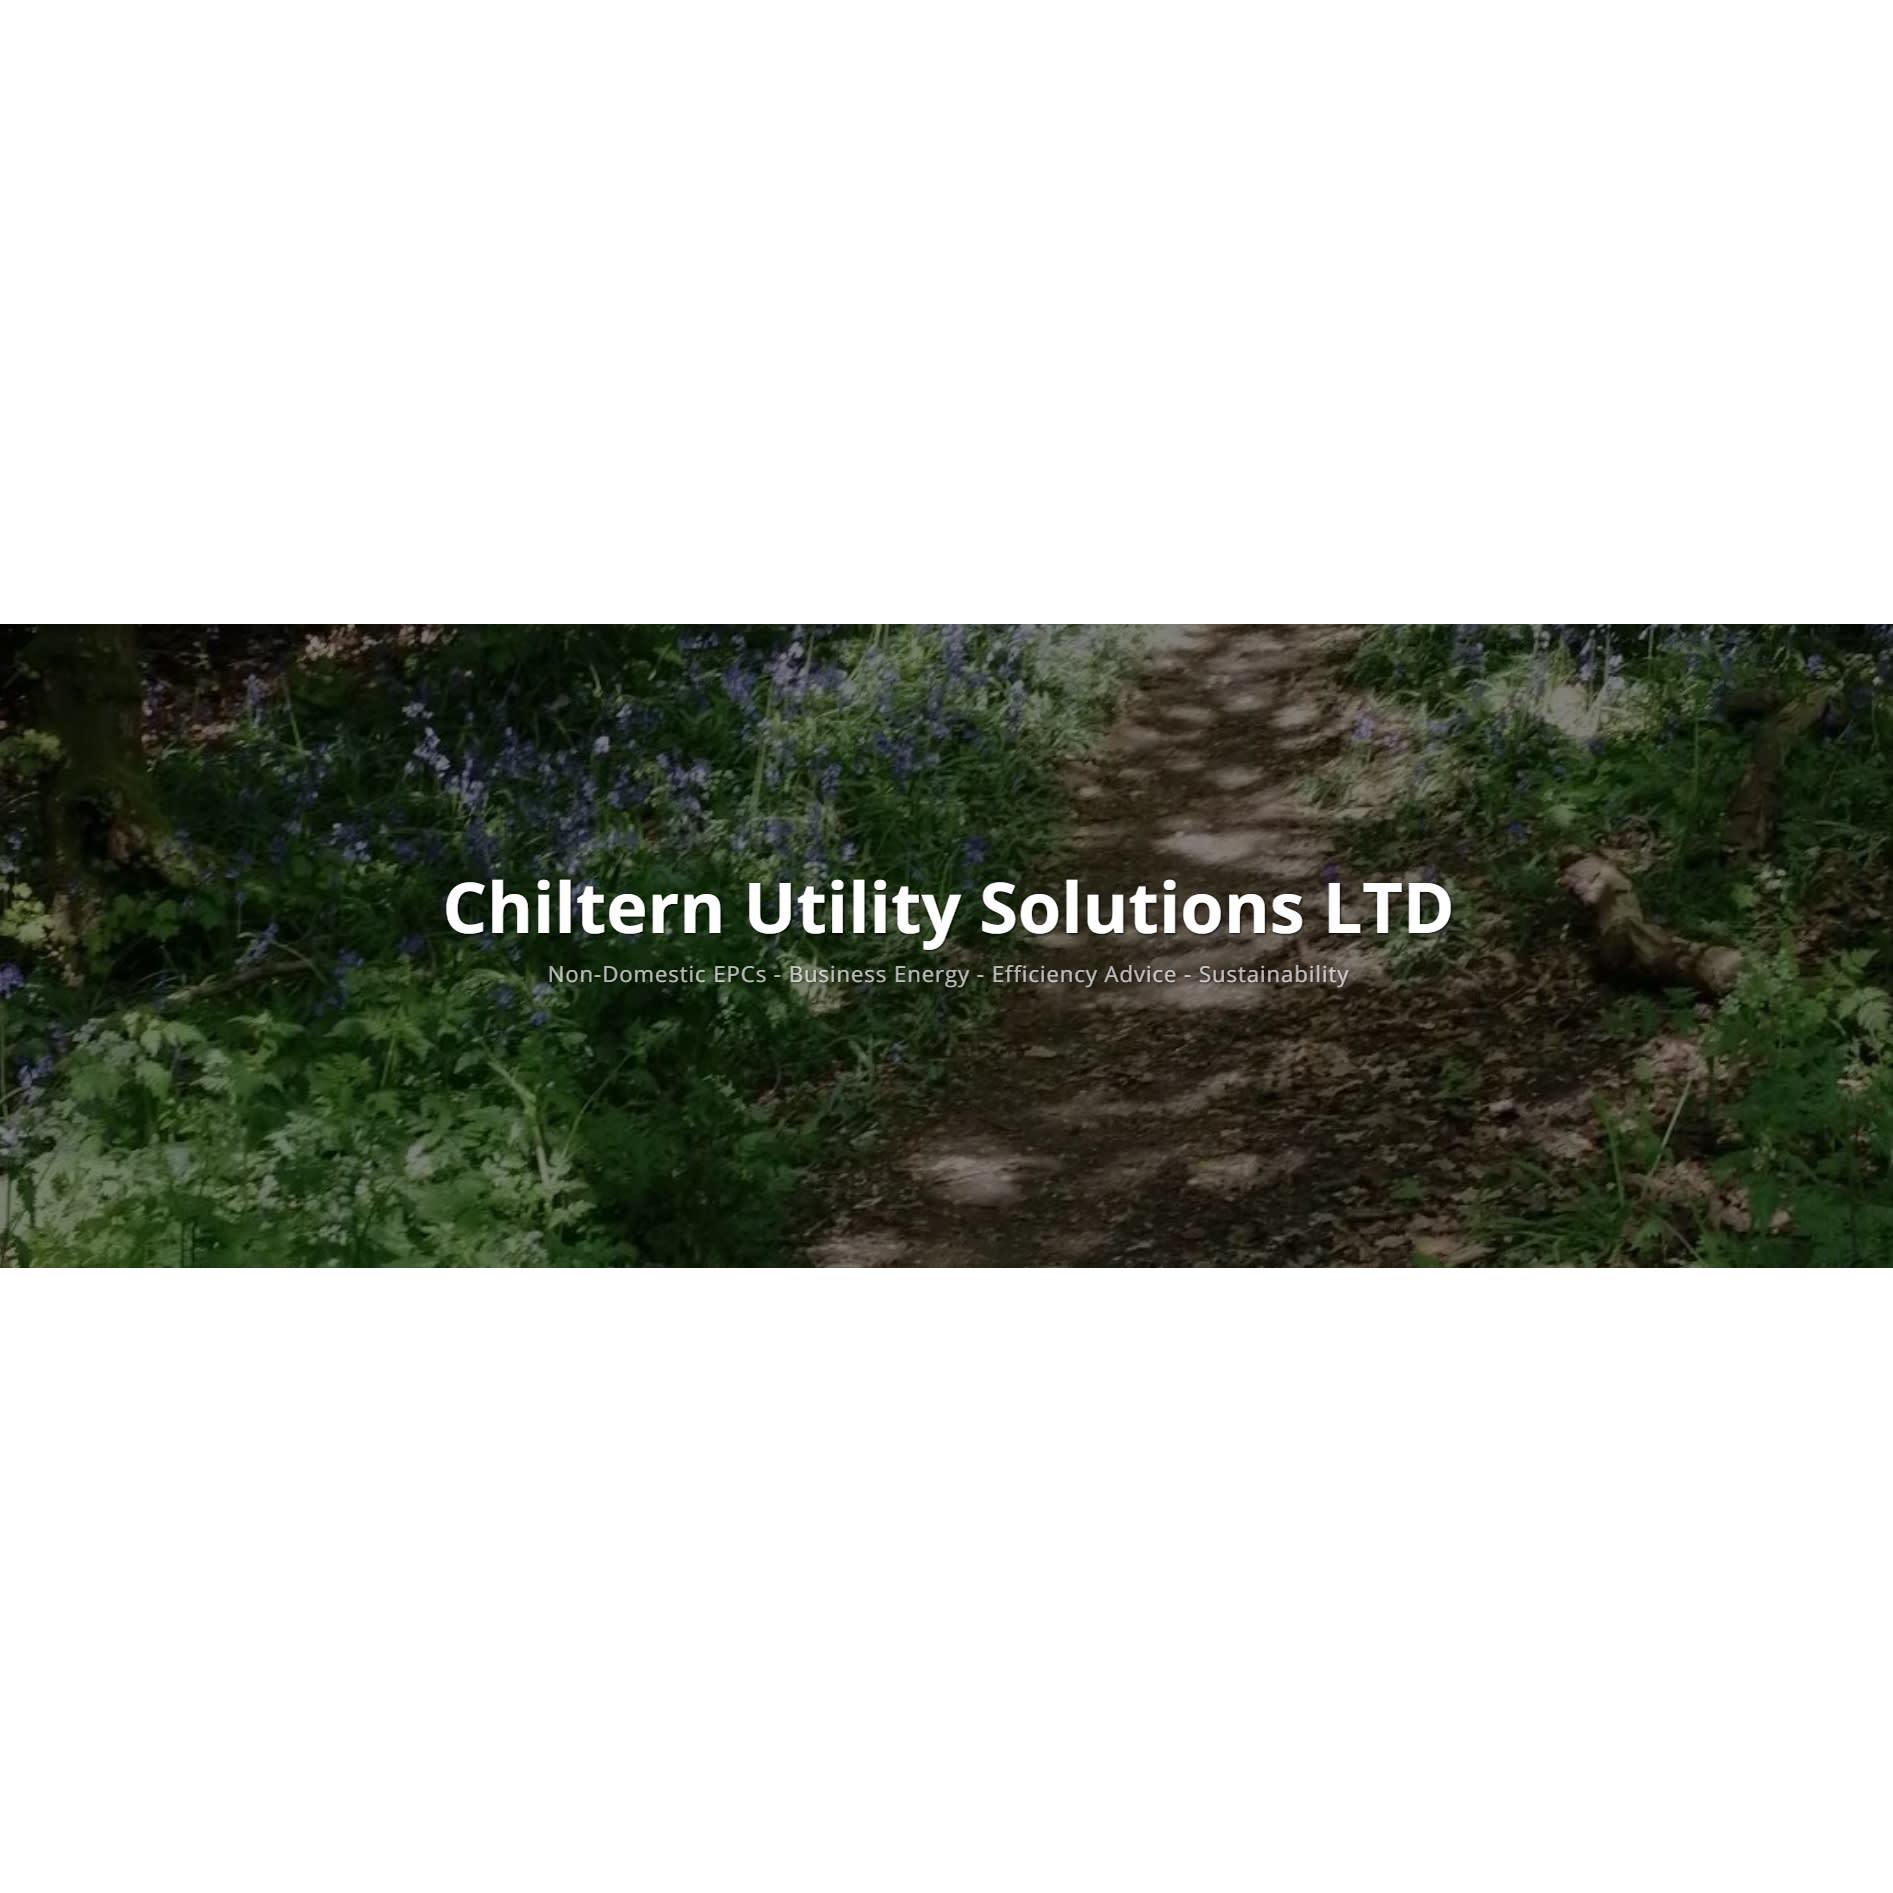 Chiltern Utility Solutions Ltd - High Wycombe, Buckinghamshire HP11 1RT - 01494 262270 | ShowMeLocal.com